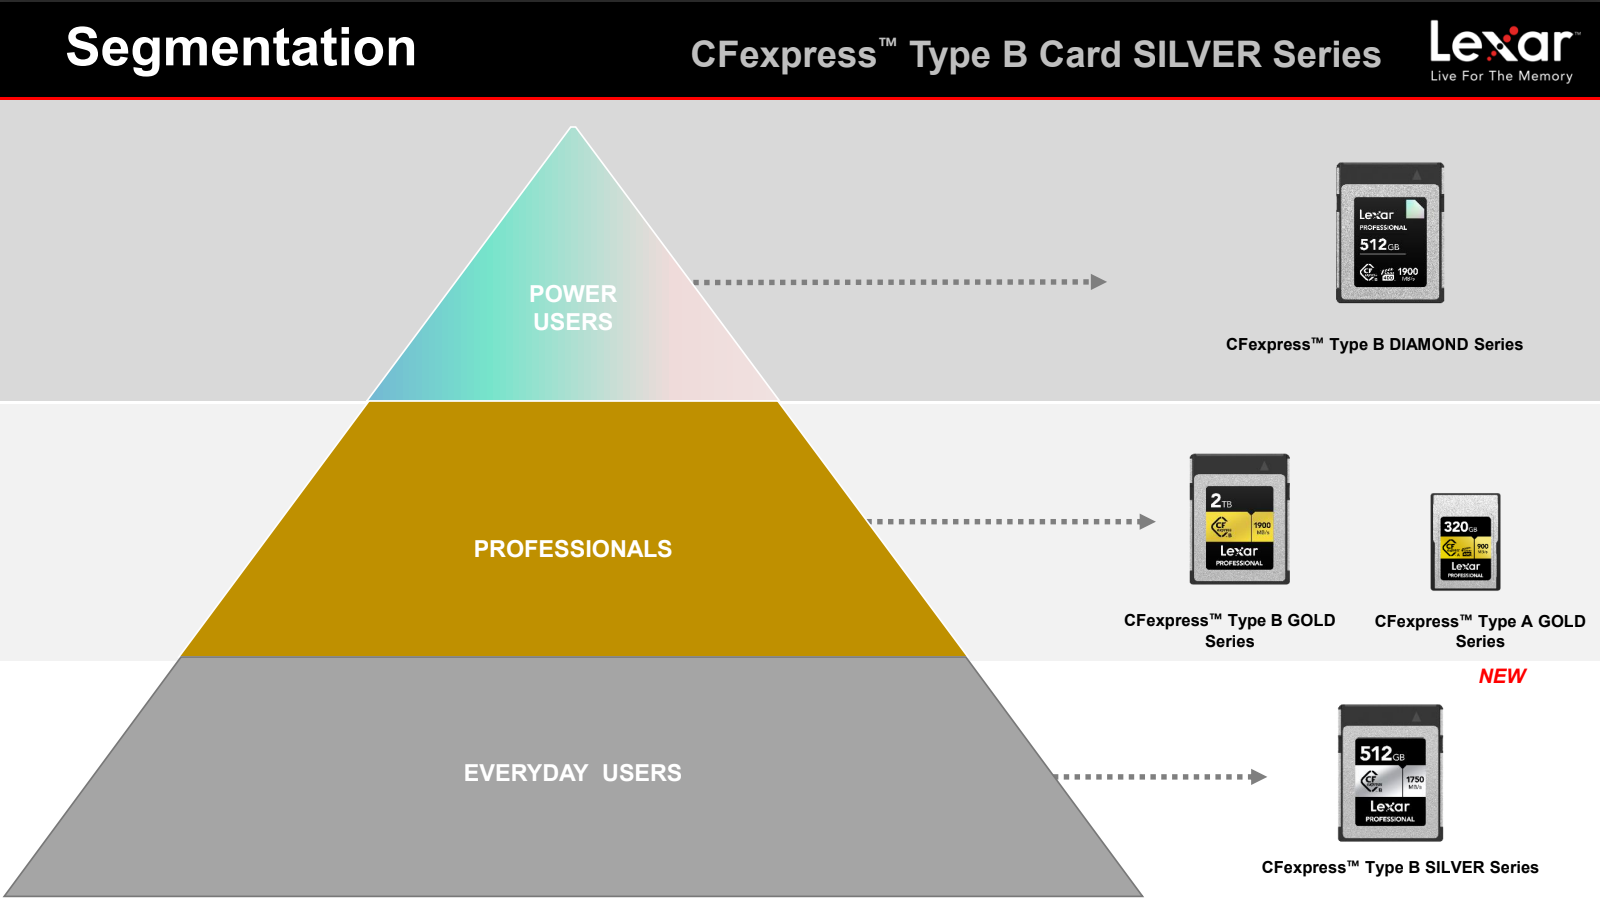 Lexar launches CFexpress Type B Card Silver series in India - The